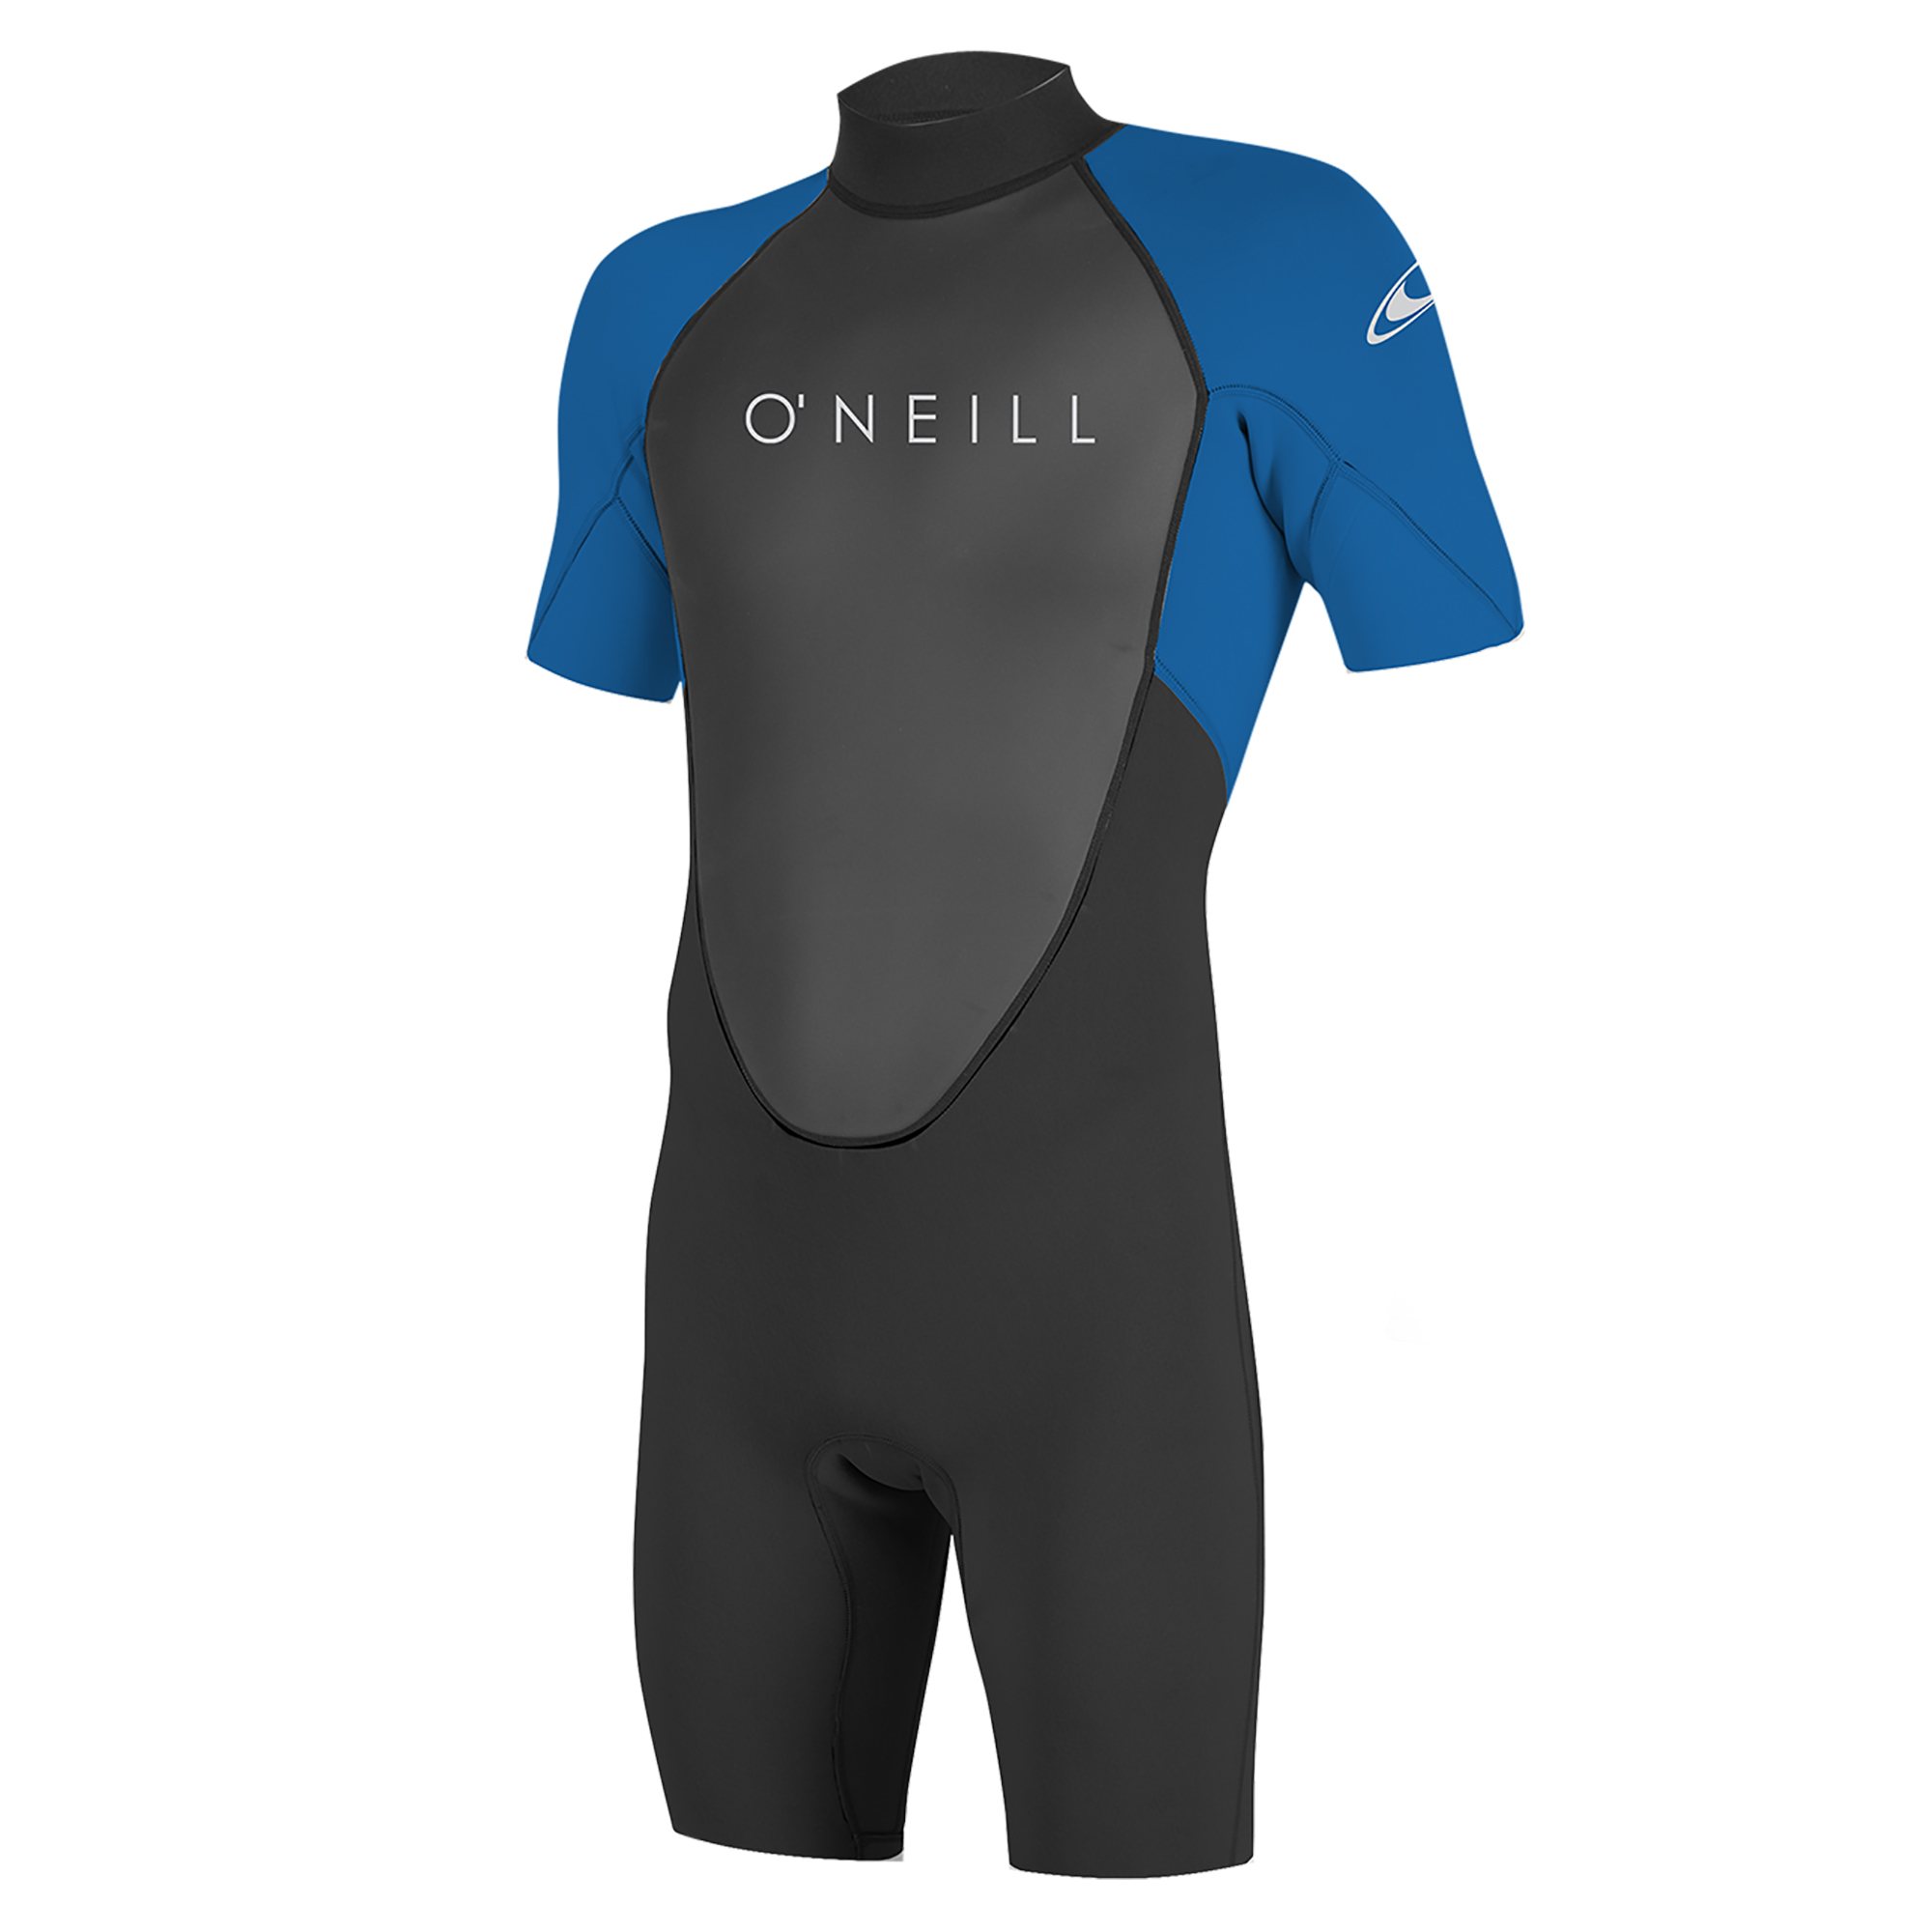 Mares Unisex-Adult Thermo Guard Wetsuit